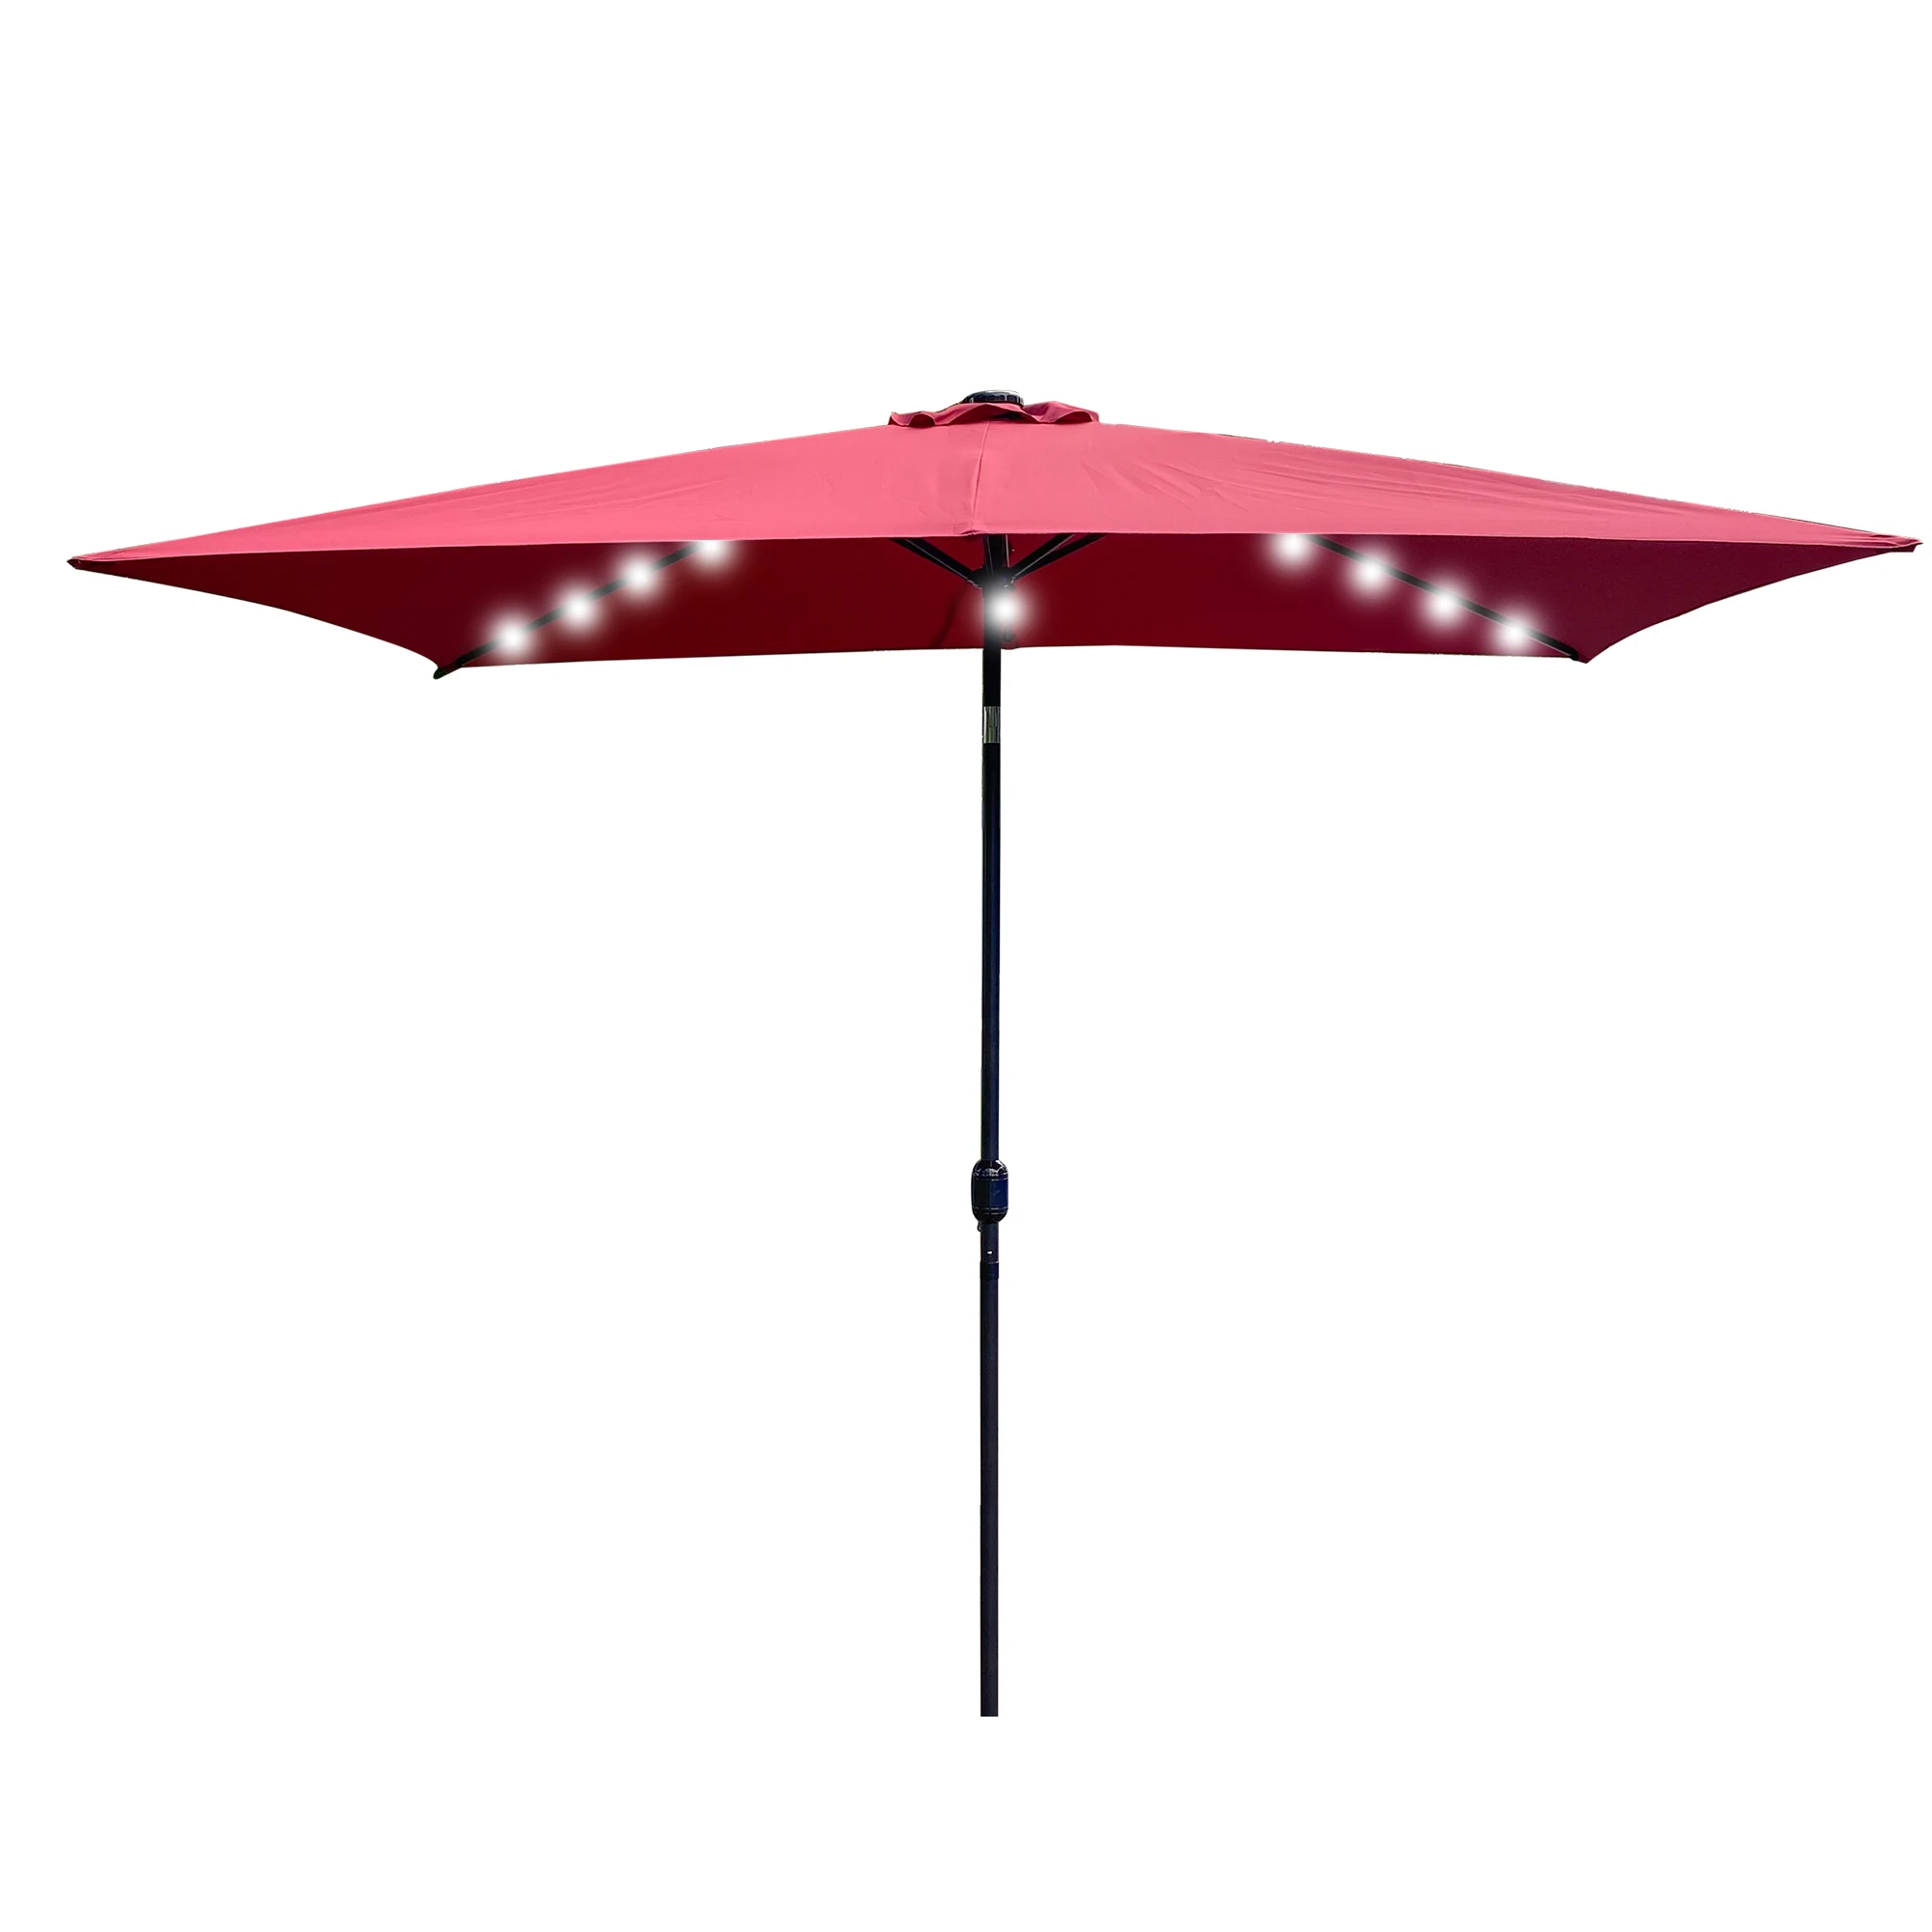 Outdoor Patio Umbrella 10 Ft x 6.5 Ft with Crank Weather Resistant 8 Sturdy Aluminuim Ribs with Push Button Tilt&Crank